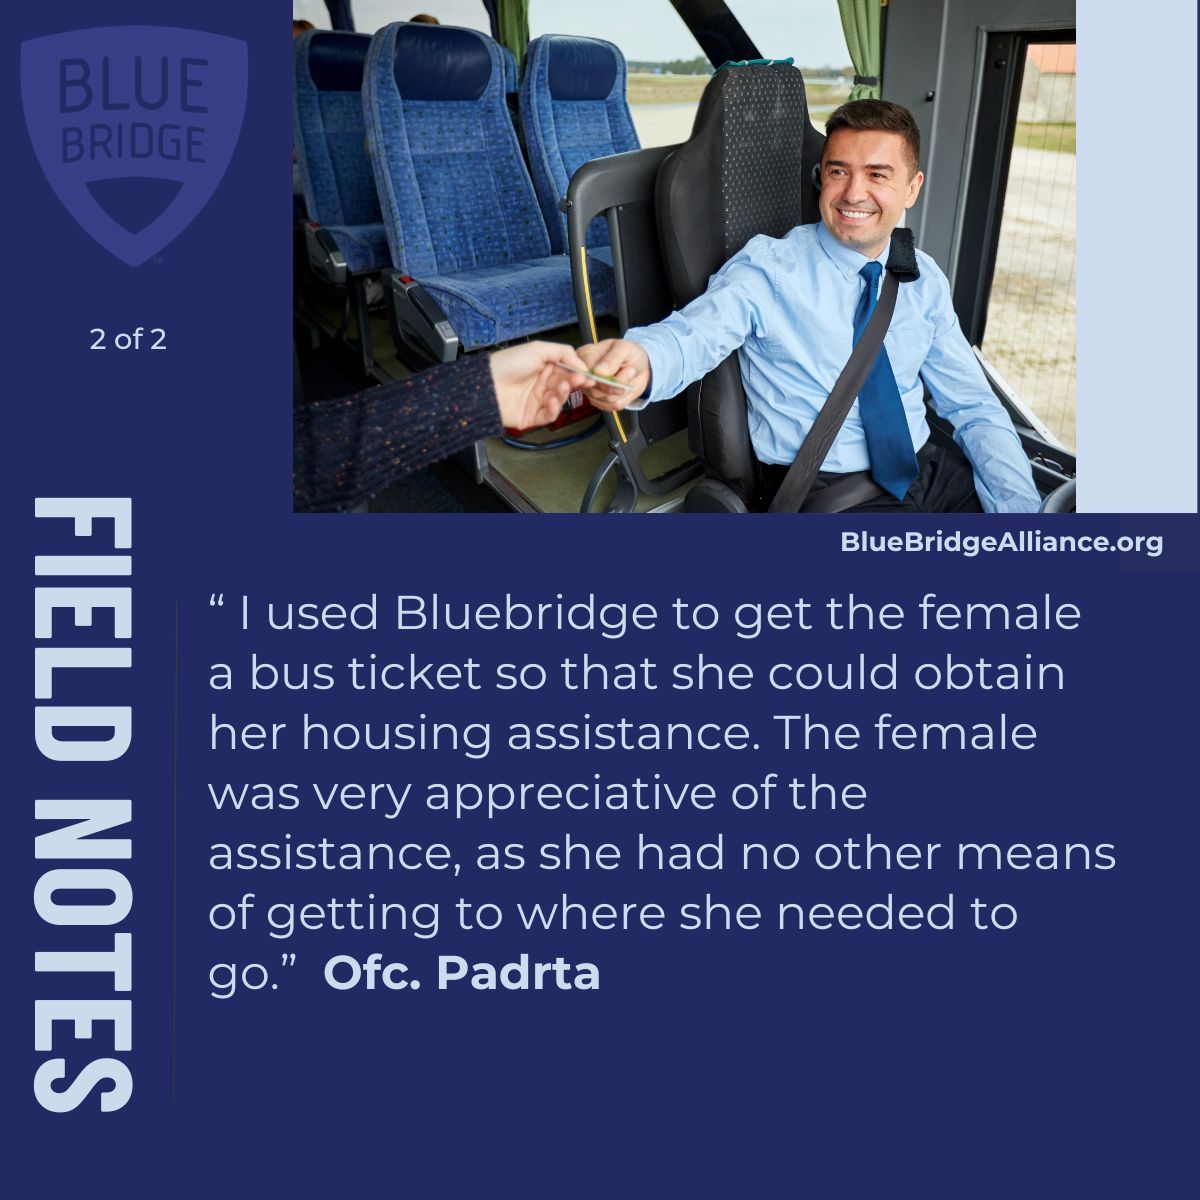 Stranded and without ID, a woman finds a lifeline in Officer Padrta's kindness. A bus ticket becomes a bridge to housing and a brighter future.  #communitypolicing #humanizingthebadge #bluebridgealliance